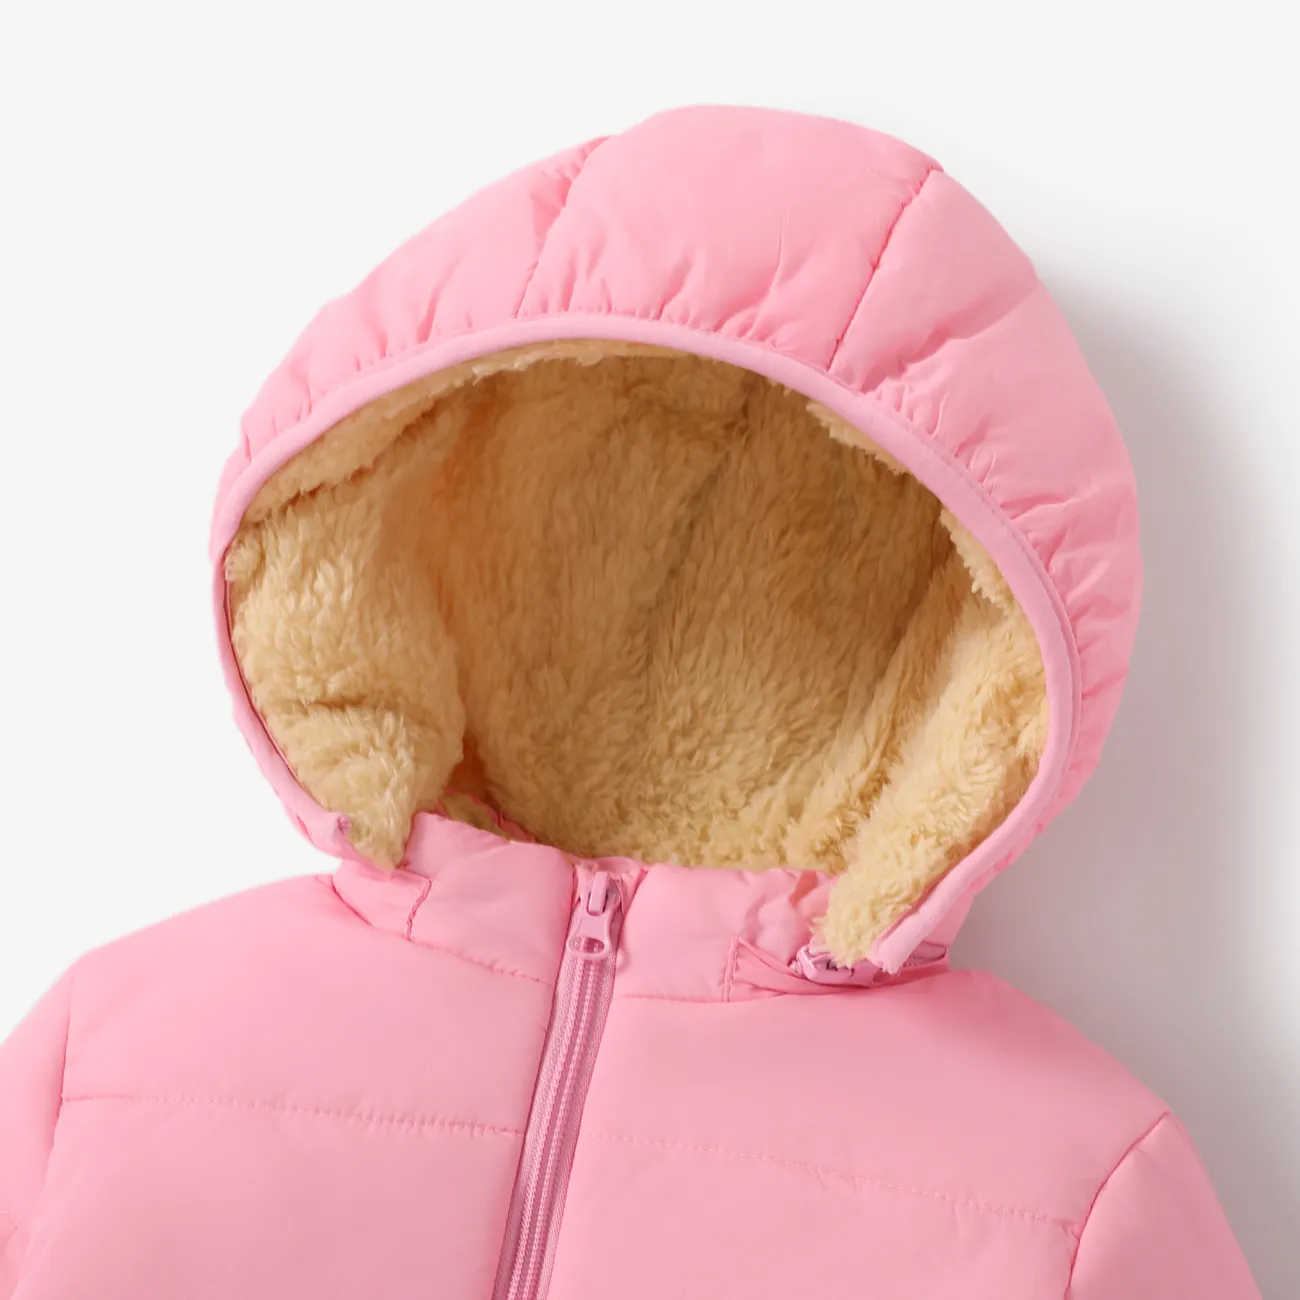 Baby / Toddler Causal Fluff Solid Long-sleeve Hooded Coat Pink big image 1